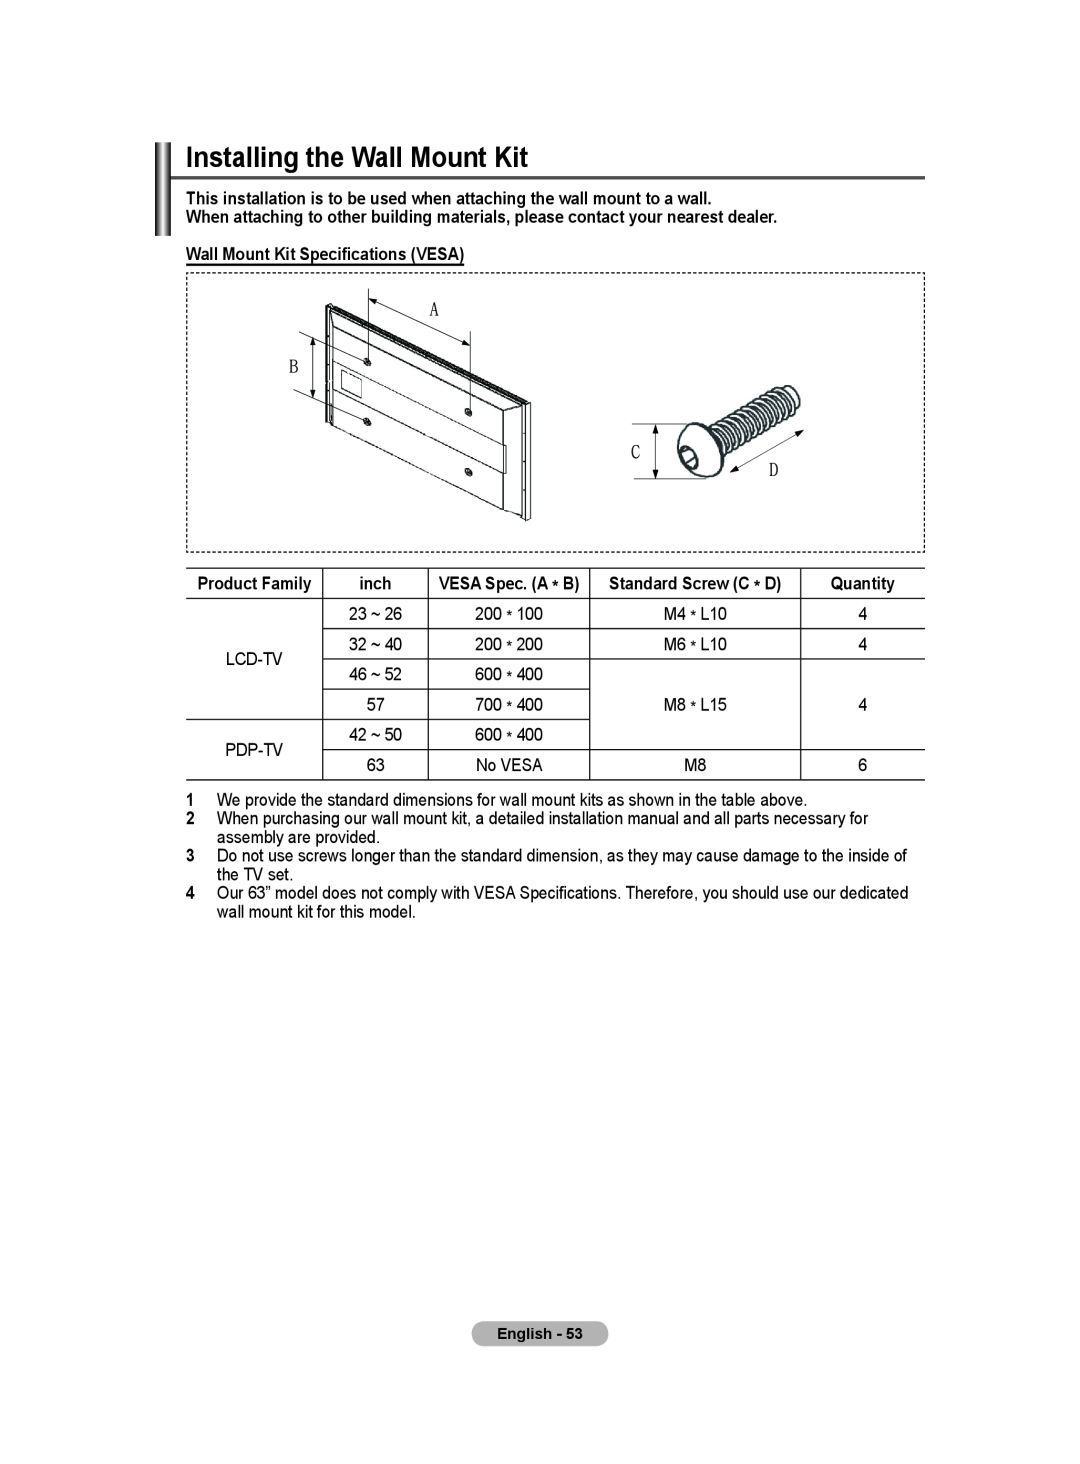 Samsung BN68-01171B-03 manual Installing the Wall Mount Kit, Wall Mount Kit Specifications VESA, inch, Quantity 